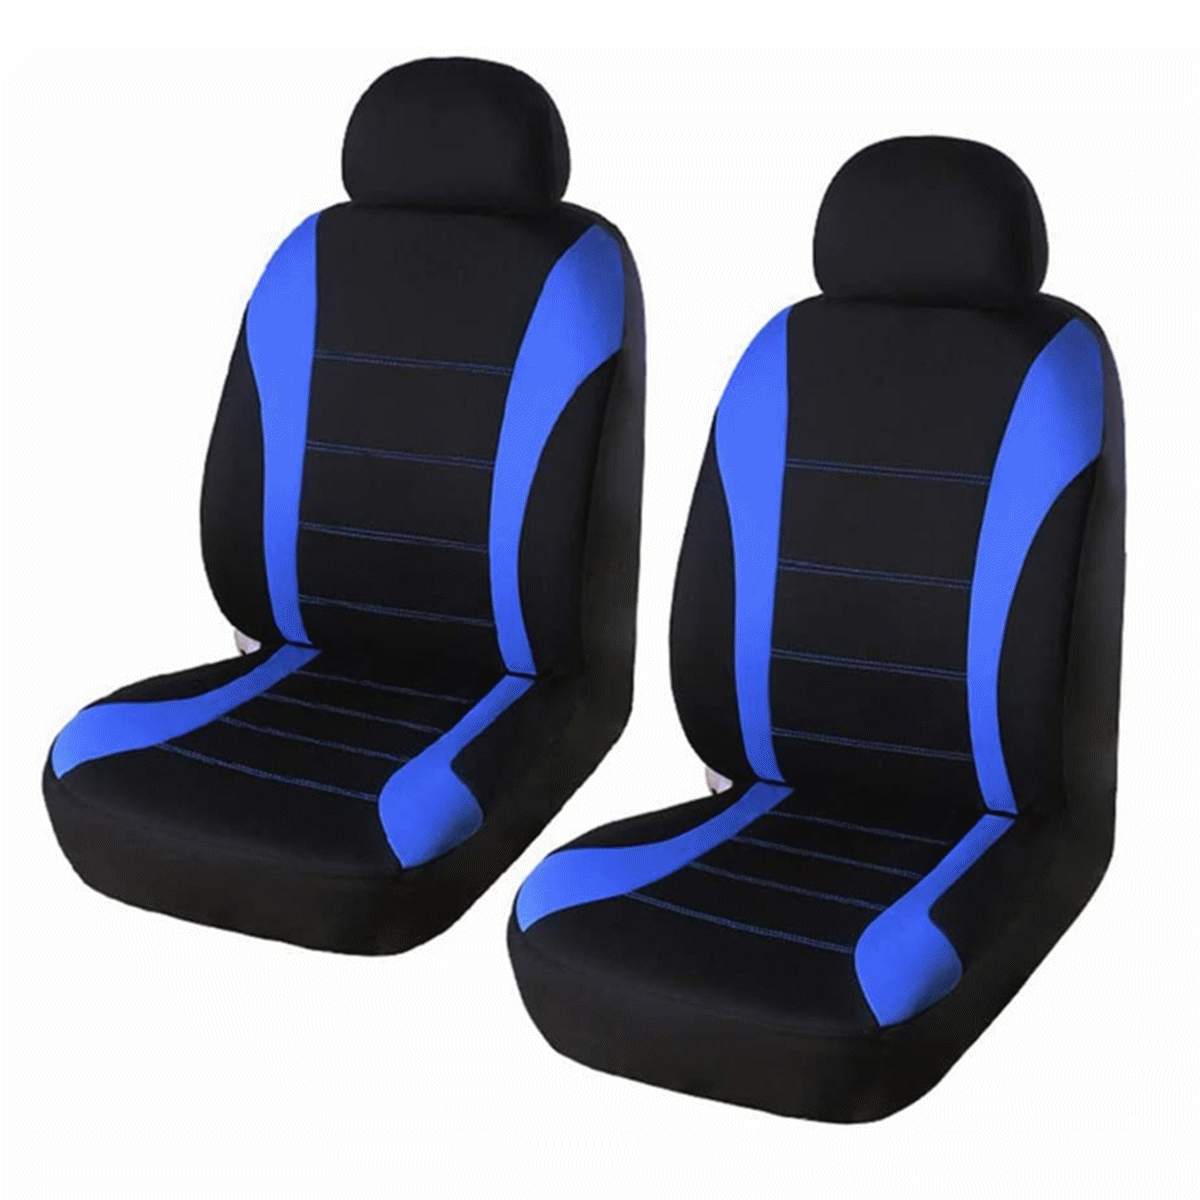 Van SUV Auto Seat Covers Full Set 9PCS Universal Fit for Car Truck Steering Wheel Cover All Seasons,Blue